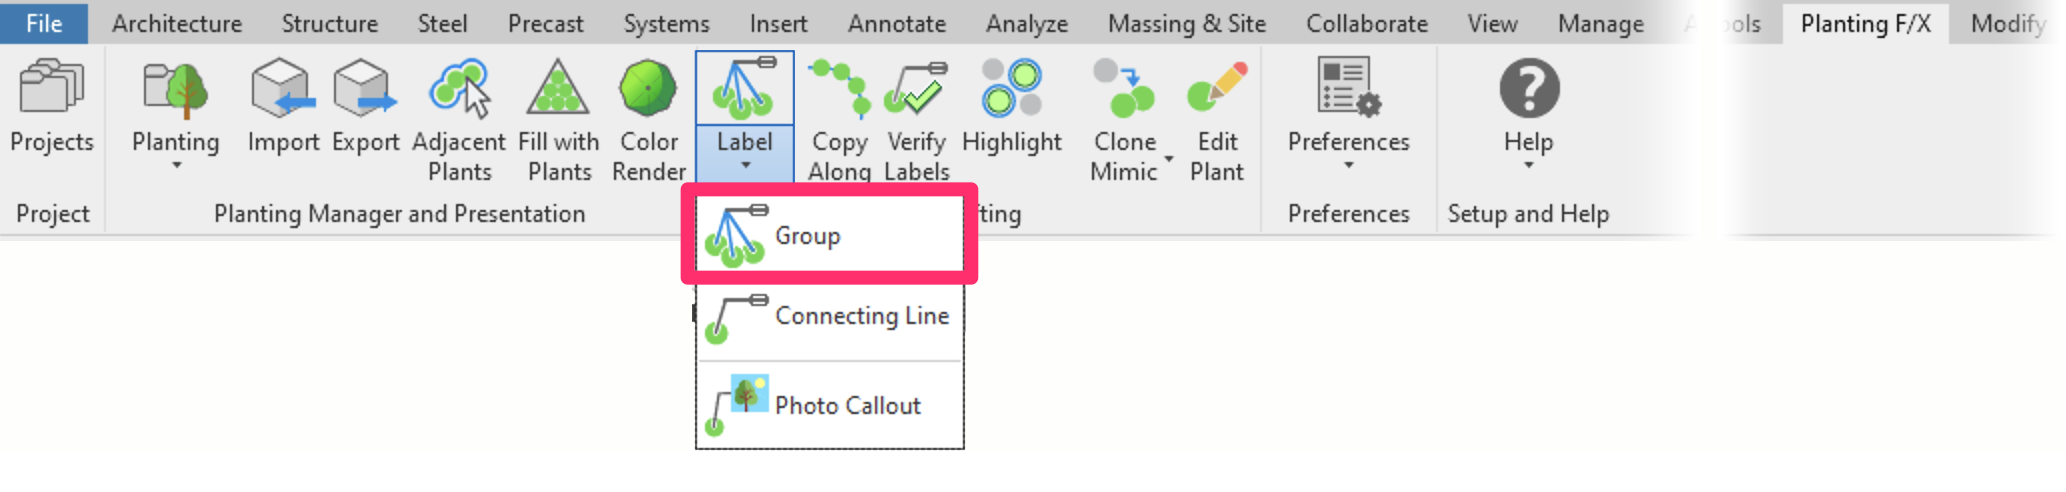 Planting F/X ribbon in Revit, Group flyout